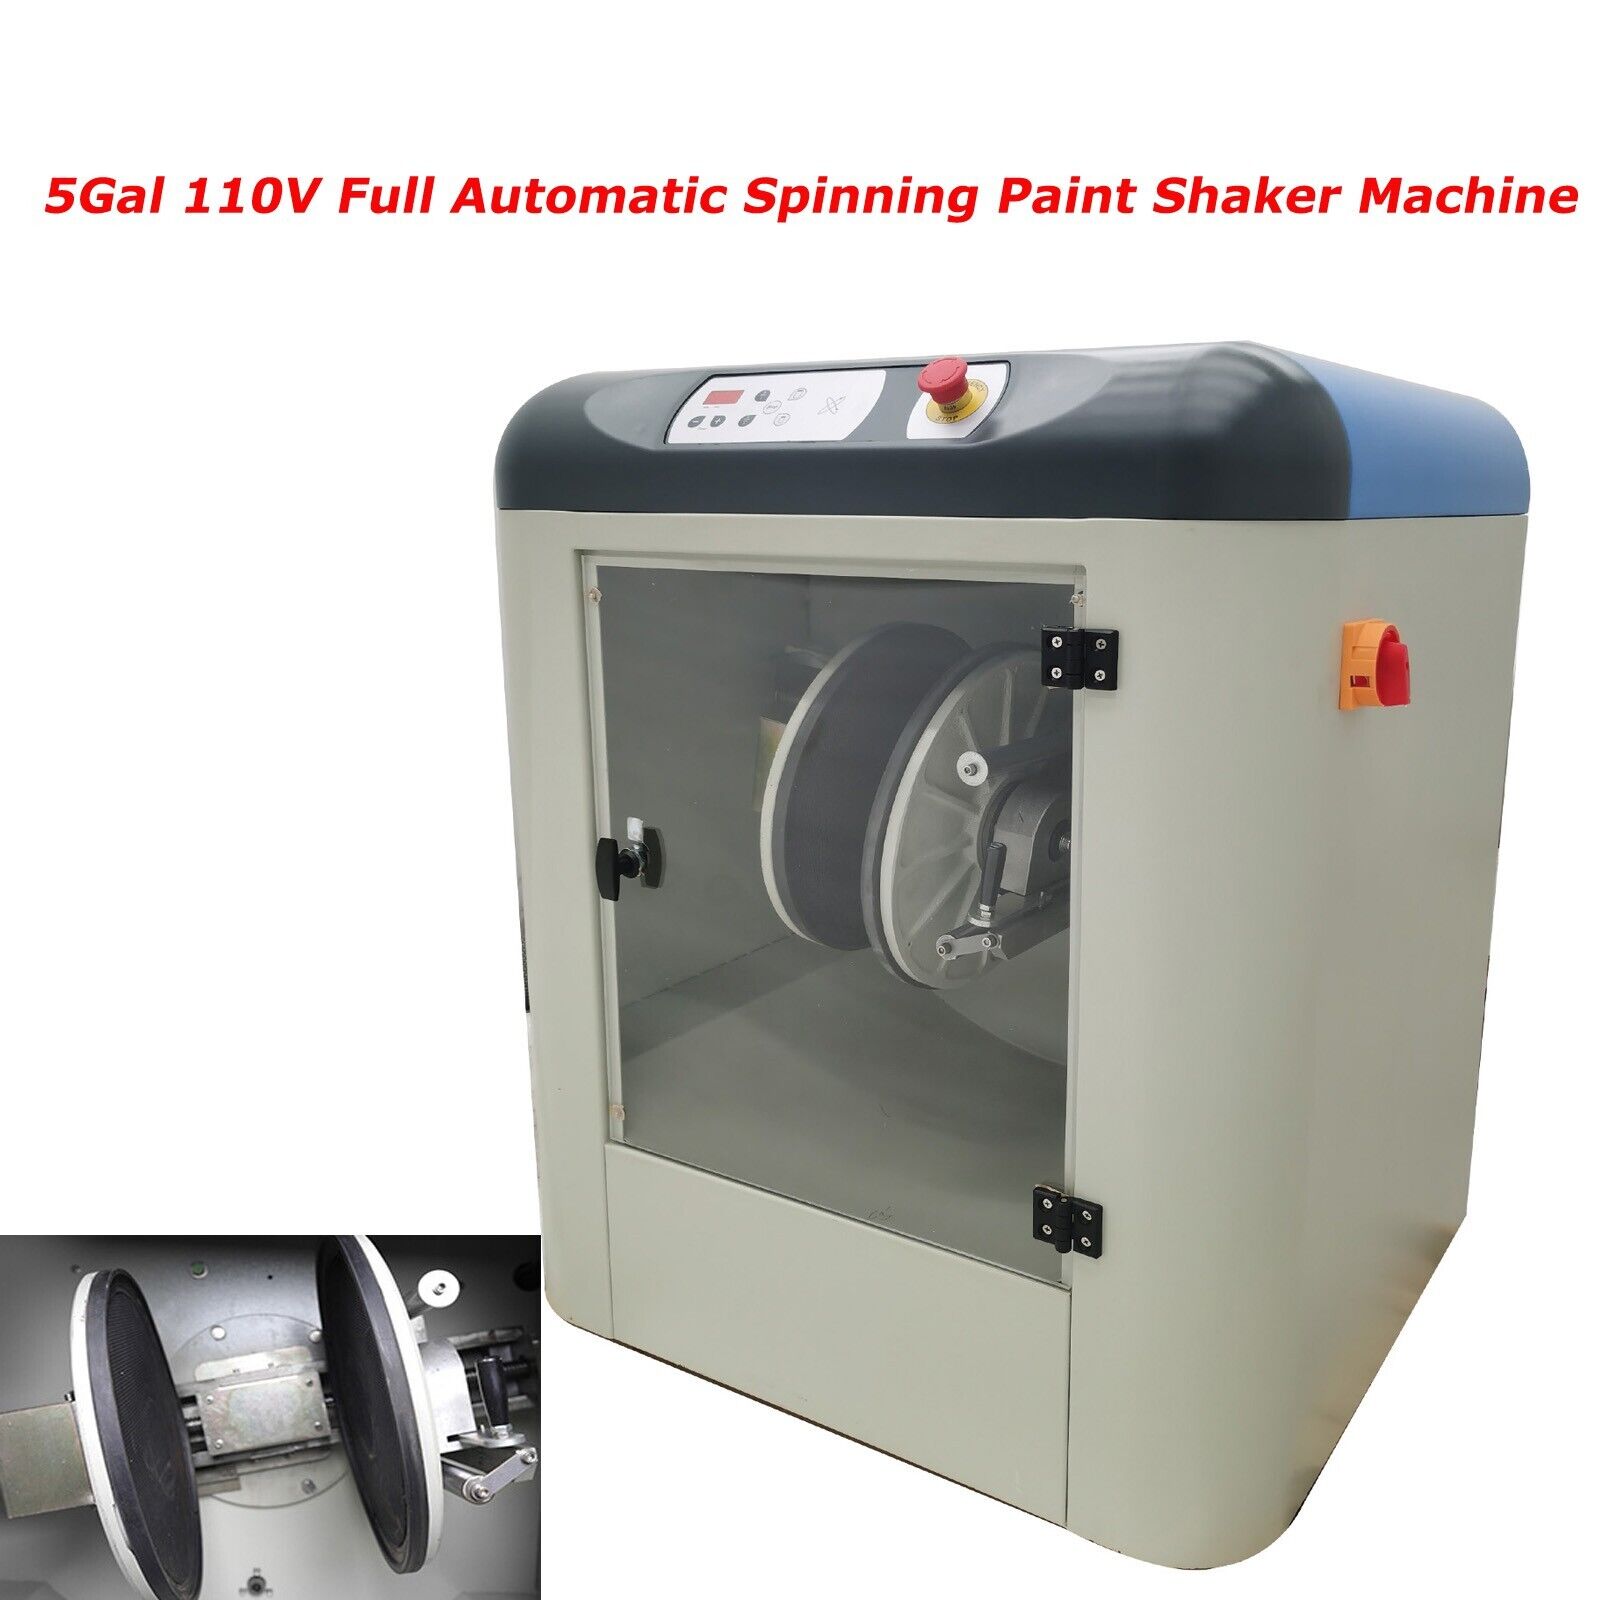 5Gal 110V Full Automatic Spinning Paint Shaker Paint Shaker Mixer Machine 750W